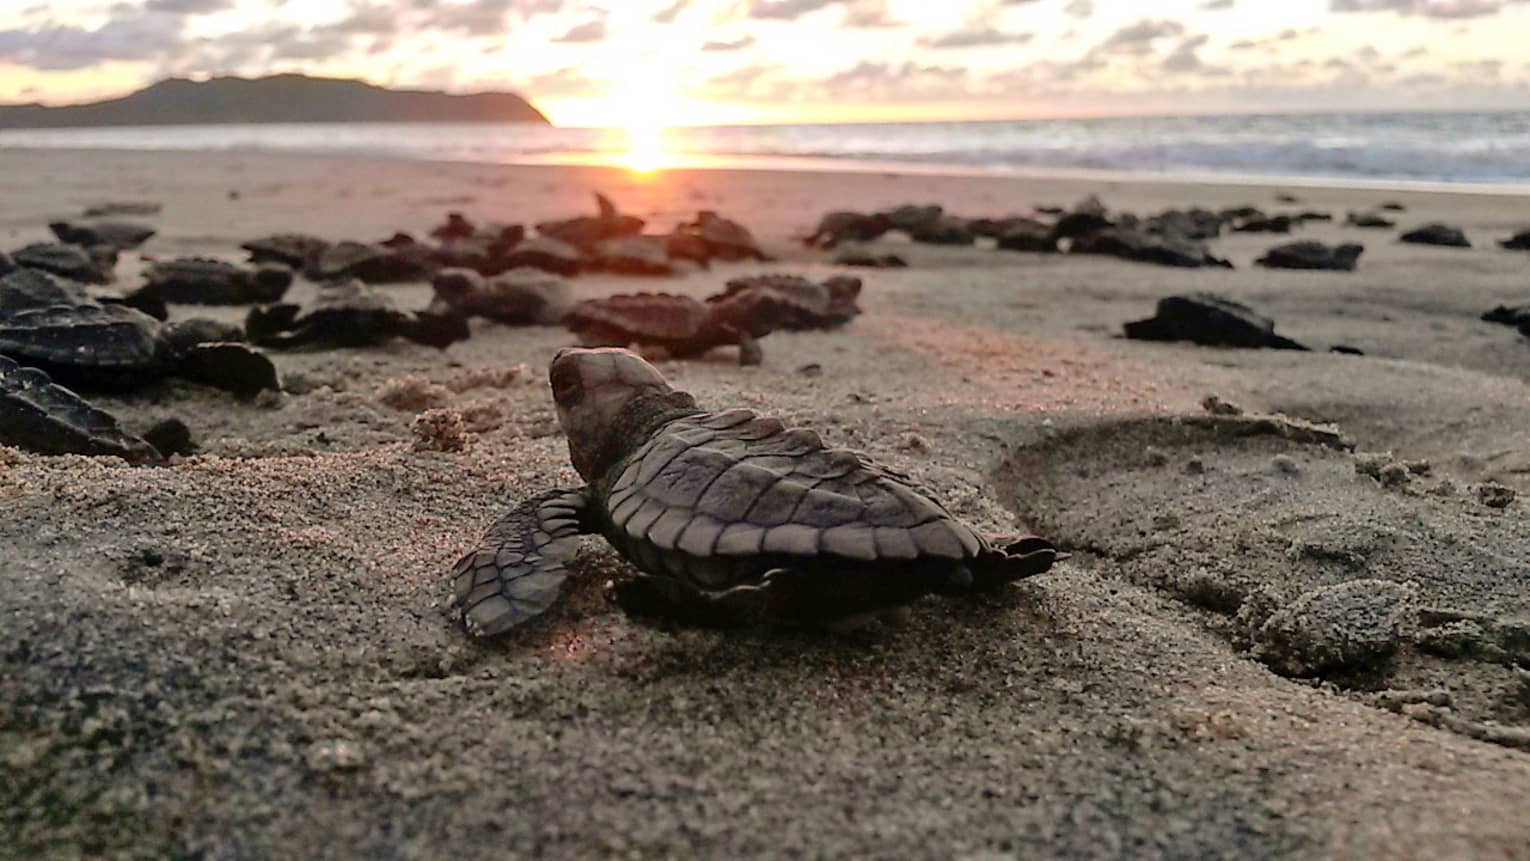 This image depicts a group of baby sea turtles moving on a beach with the sun in the distance, and is connected to ESG and sustainability 